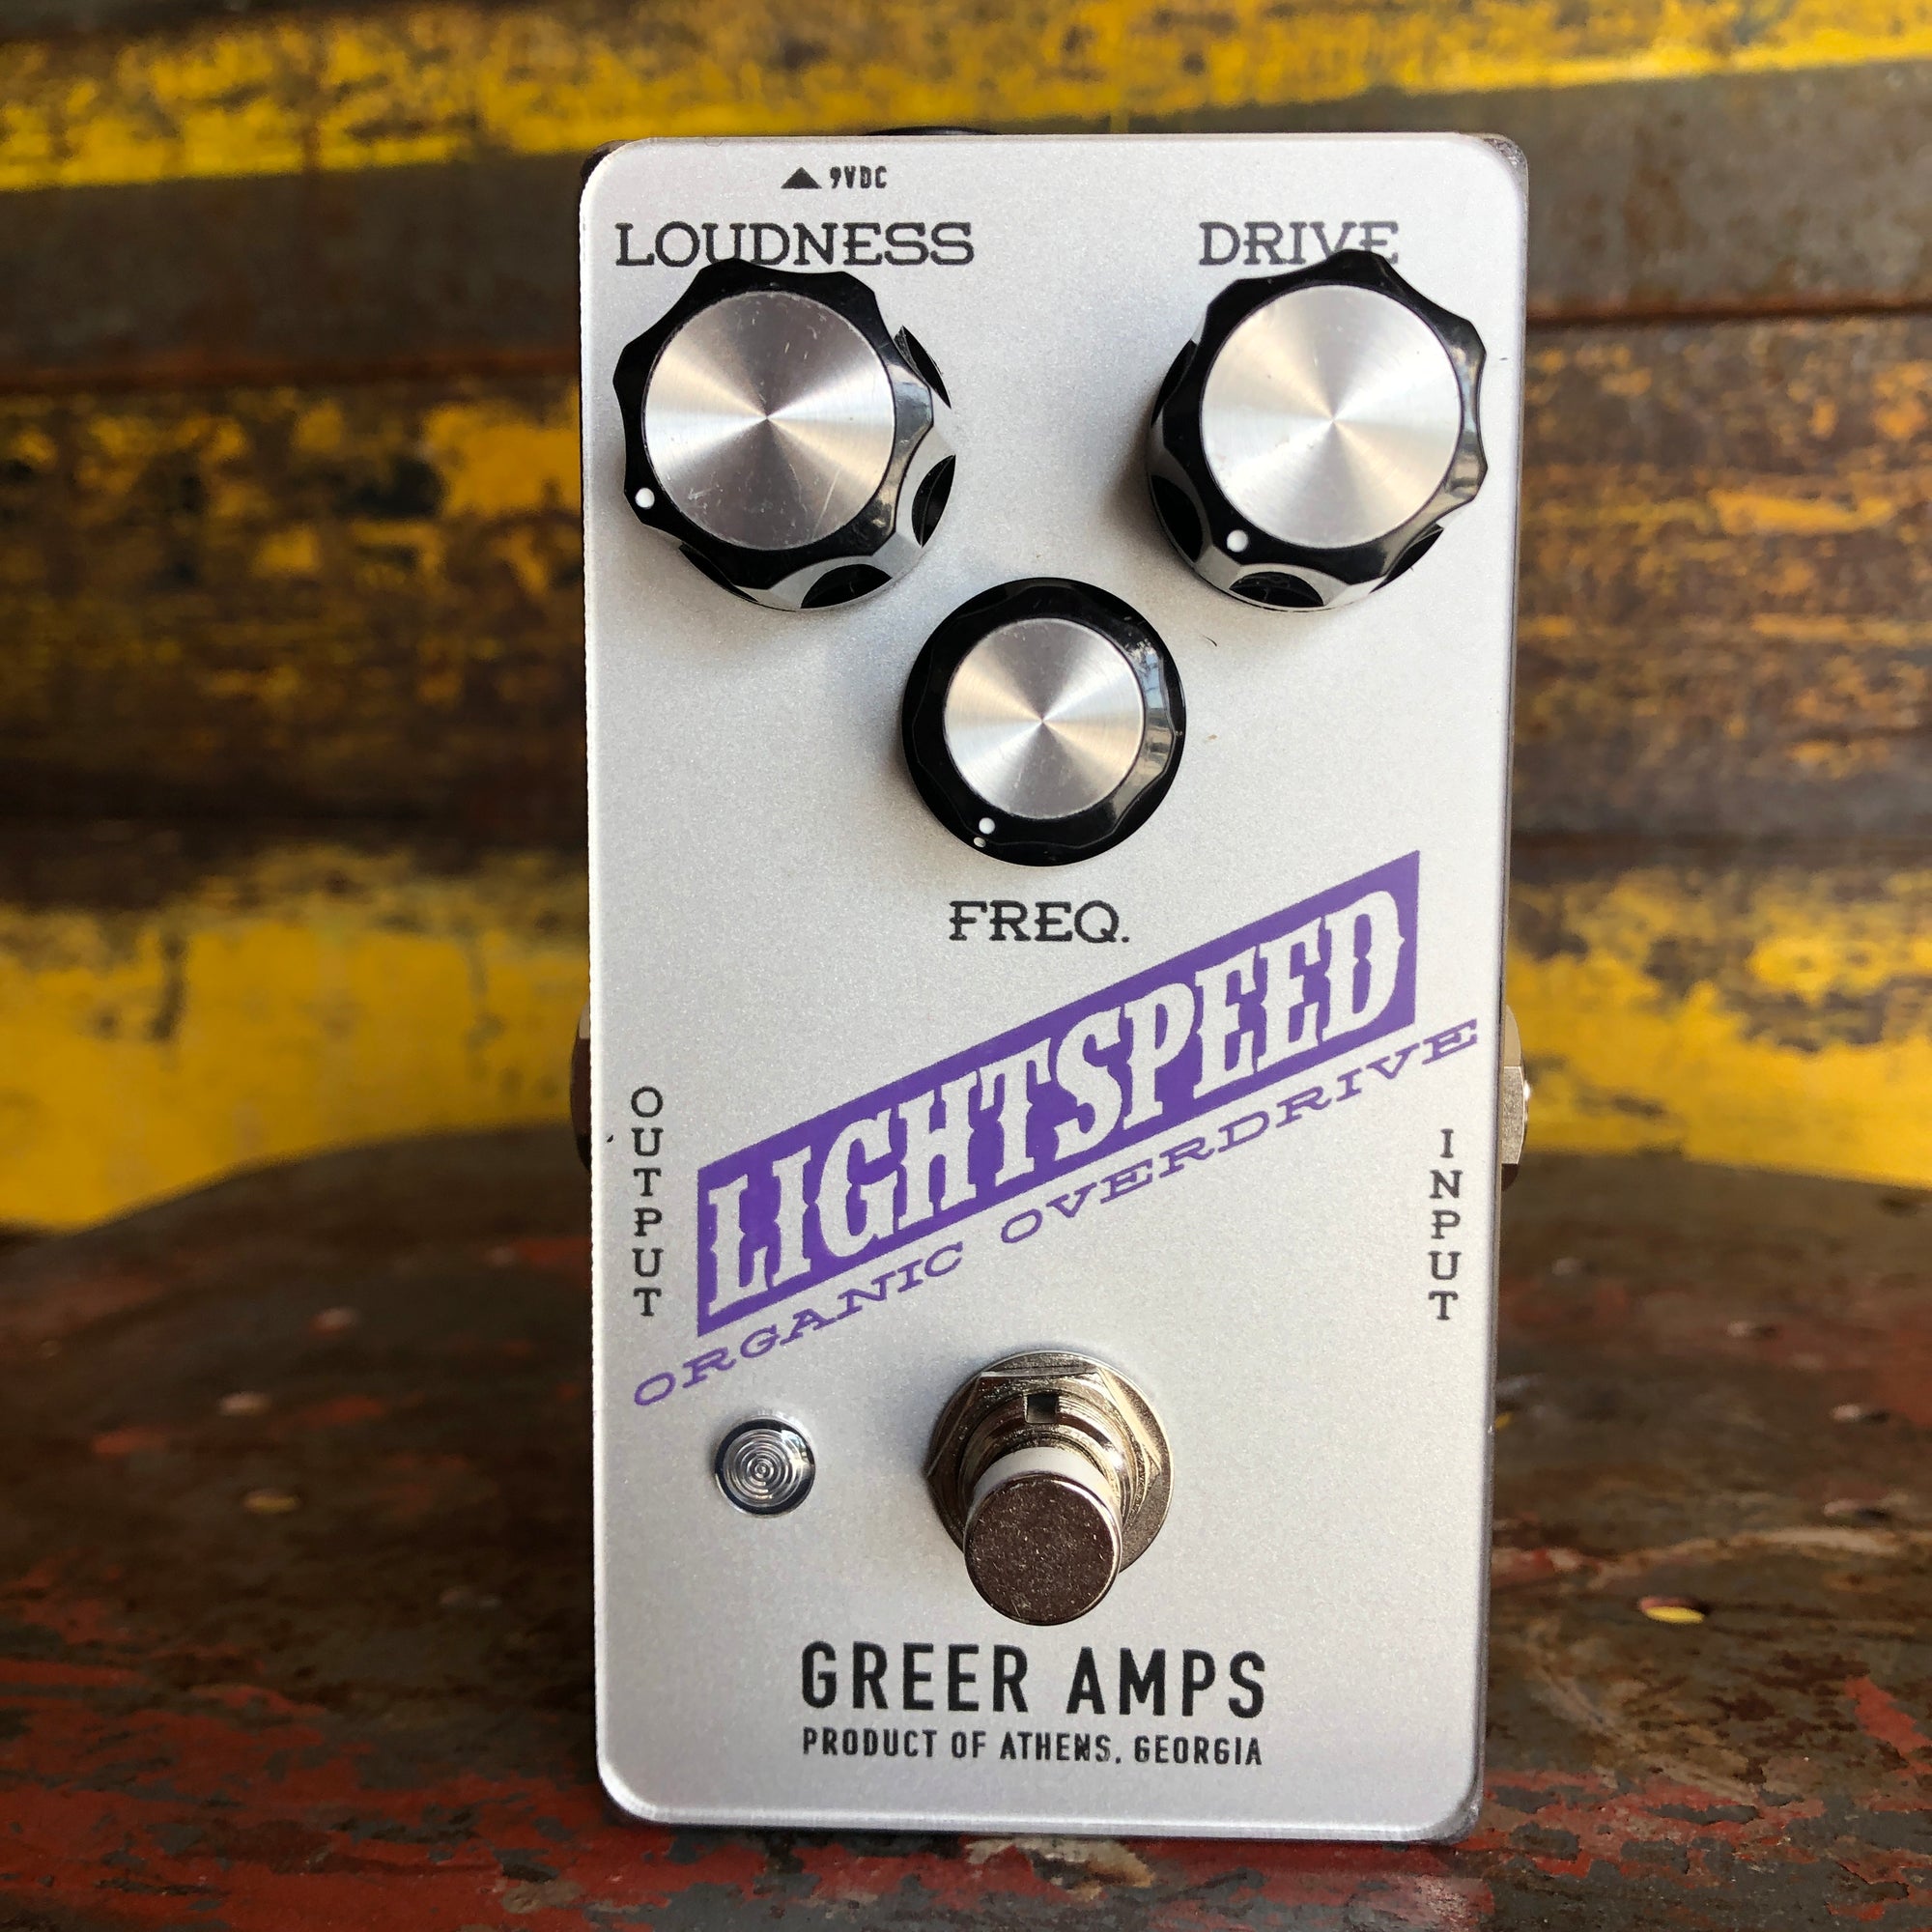 Greer Amps Lightspeed Organic Overdrive - Limited Edition Silver / Purple Colorway